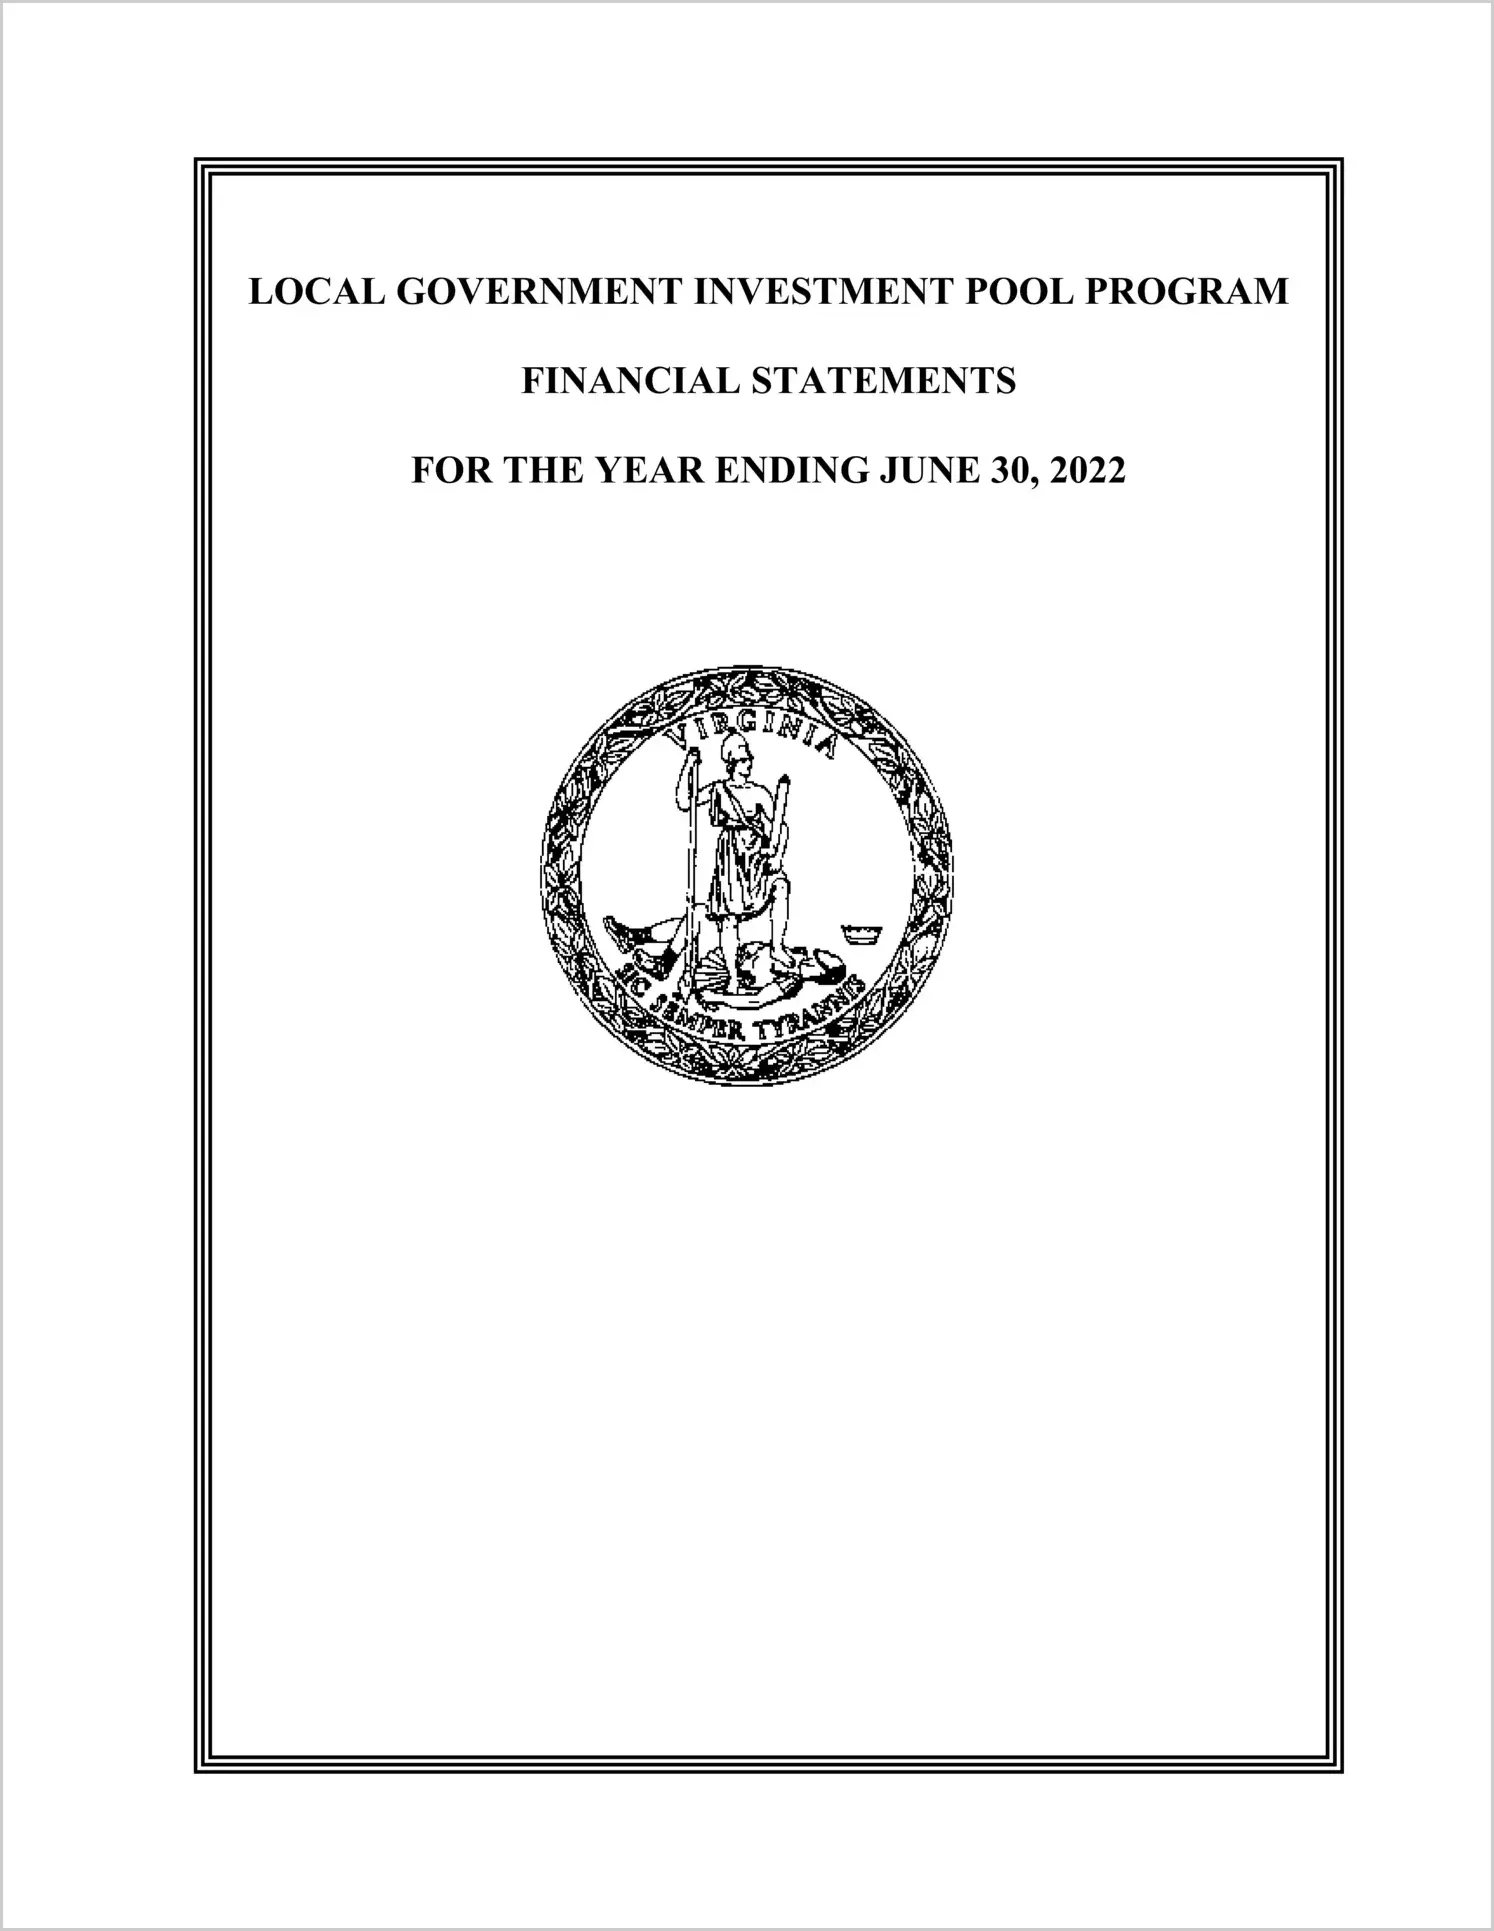 Local Government Investment Pool Program Financial Statements for the year ended June 30, 2022